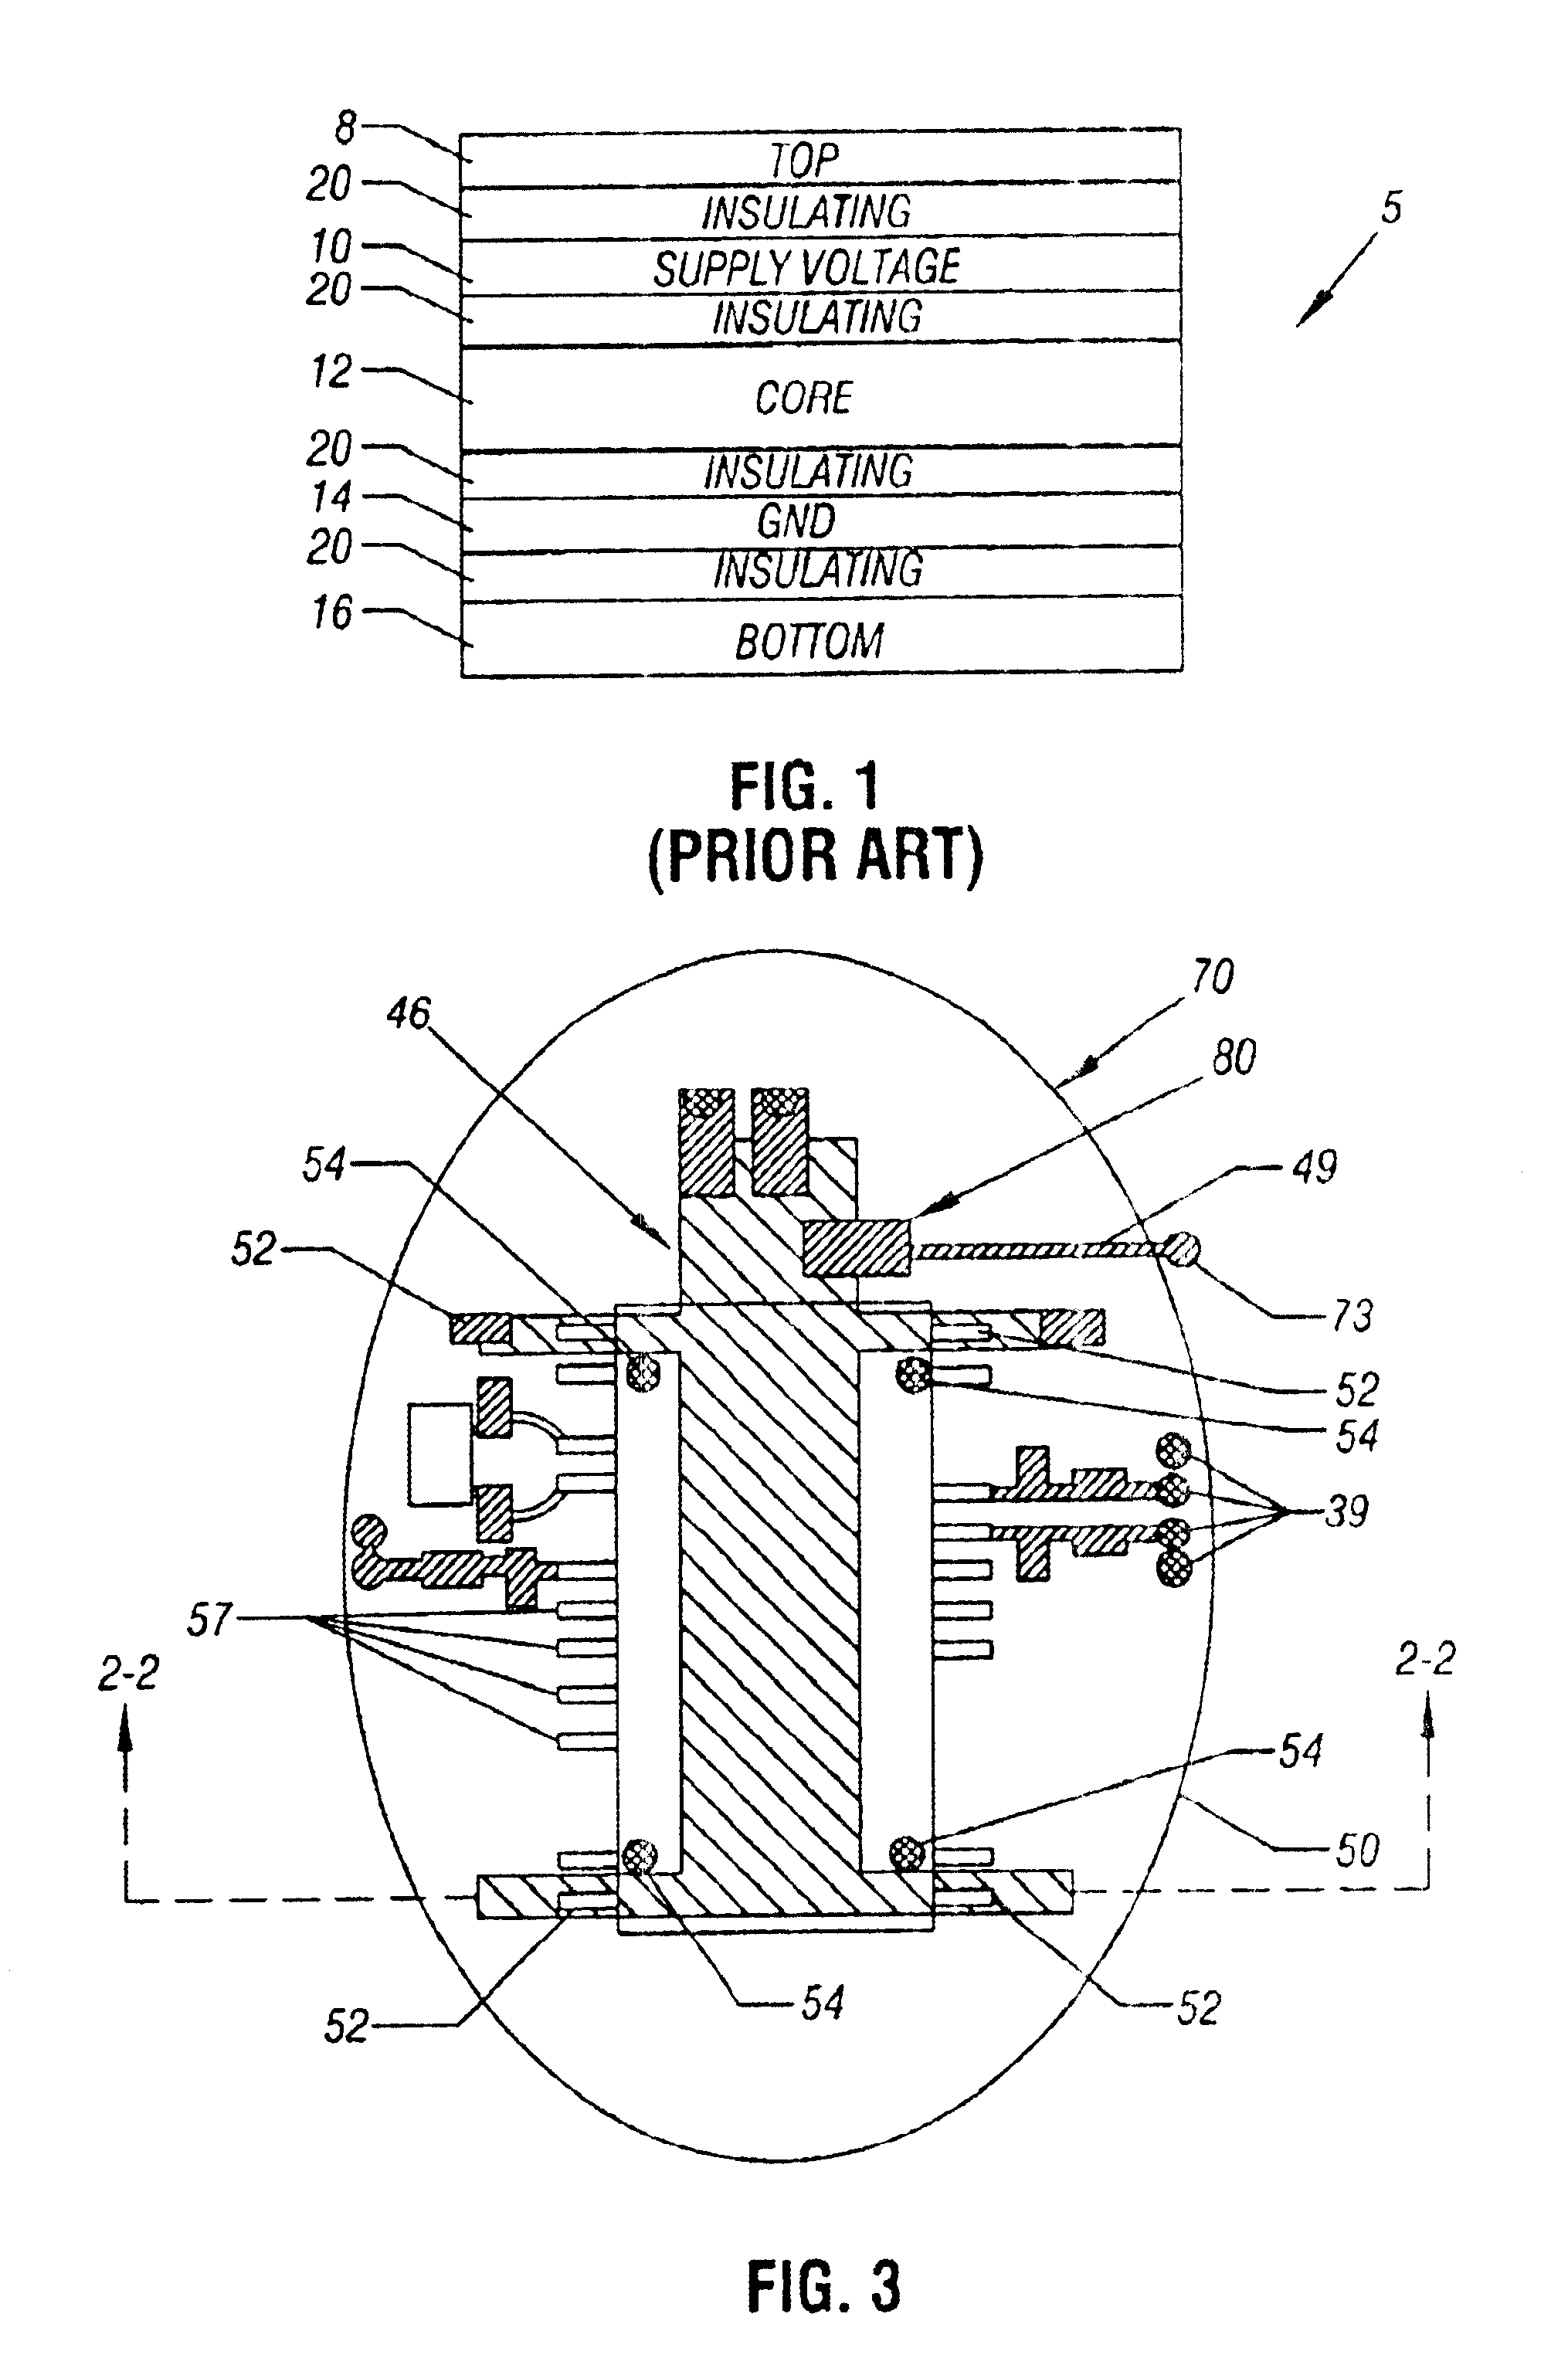 Printed circuit board routing and power delivery for high frequency integrated circuits